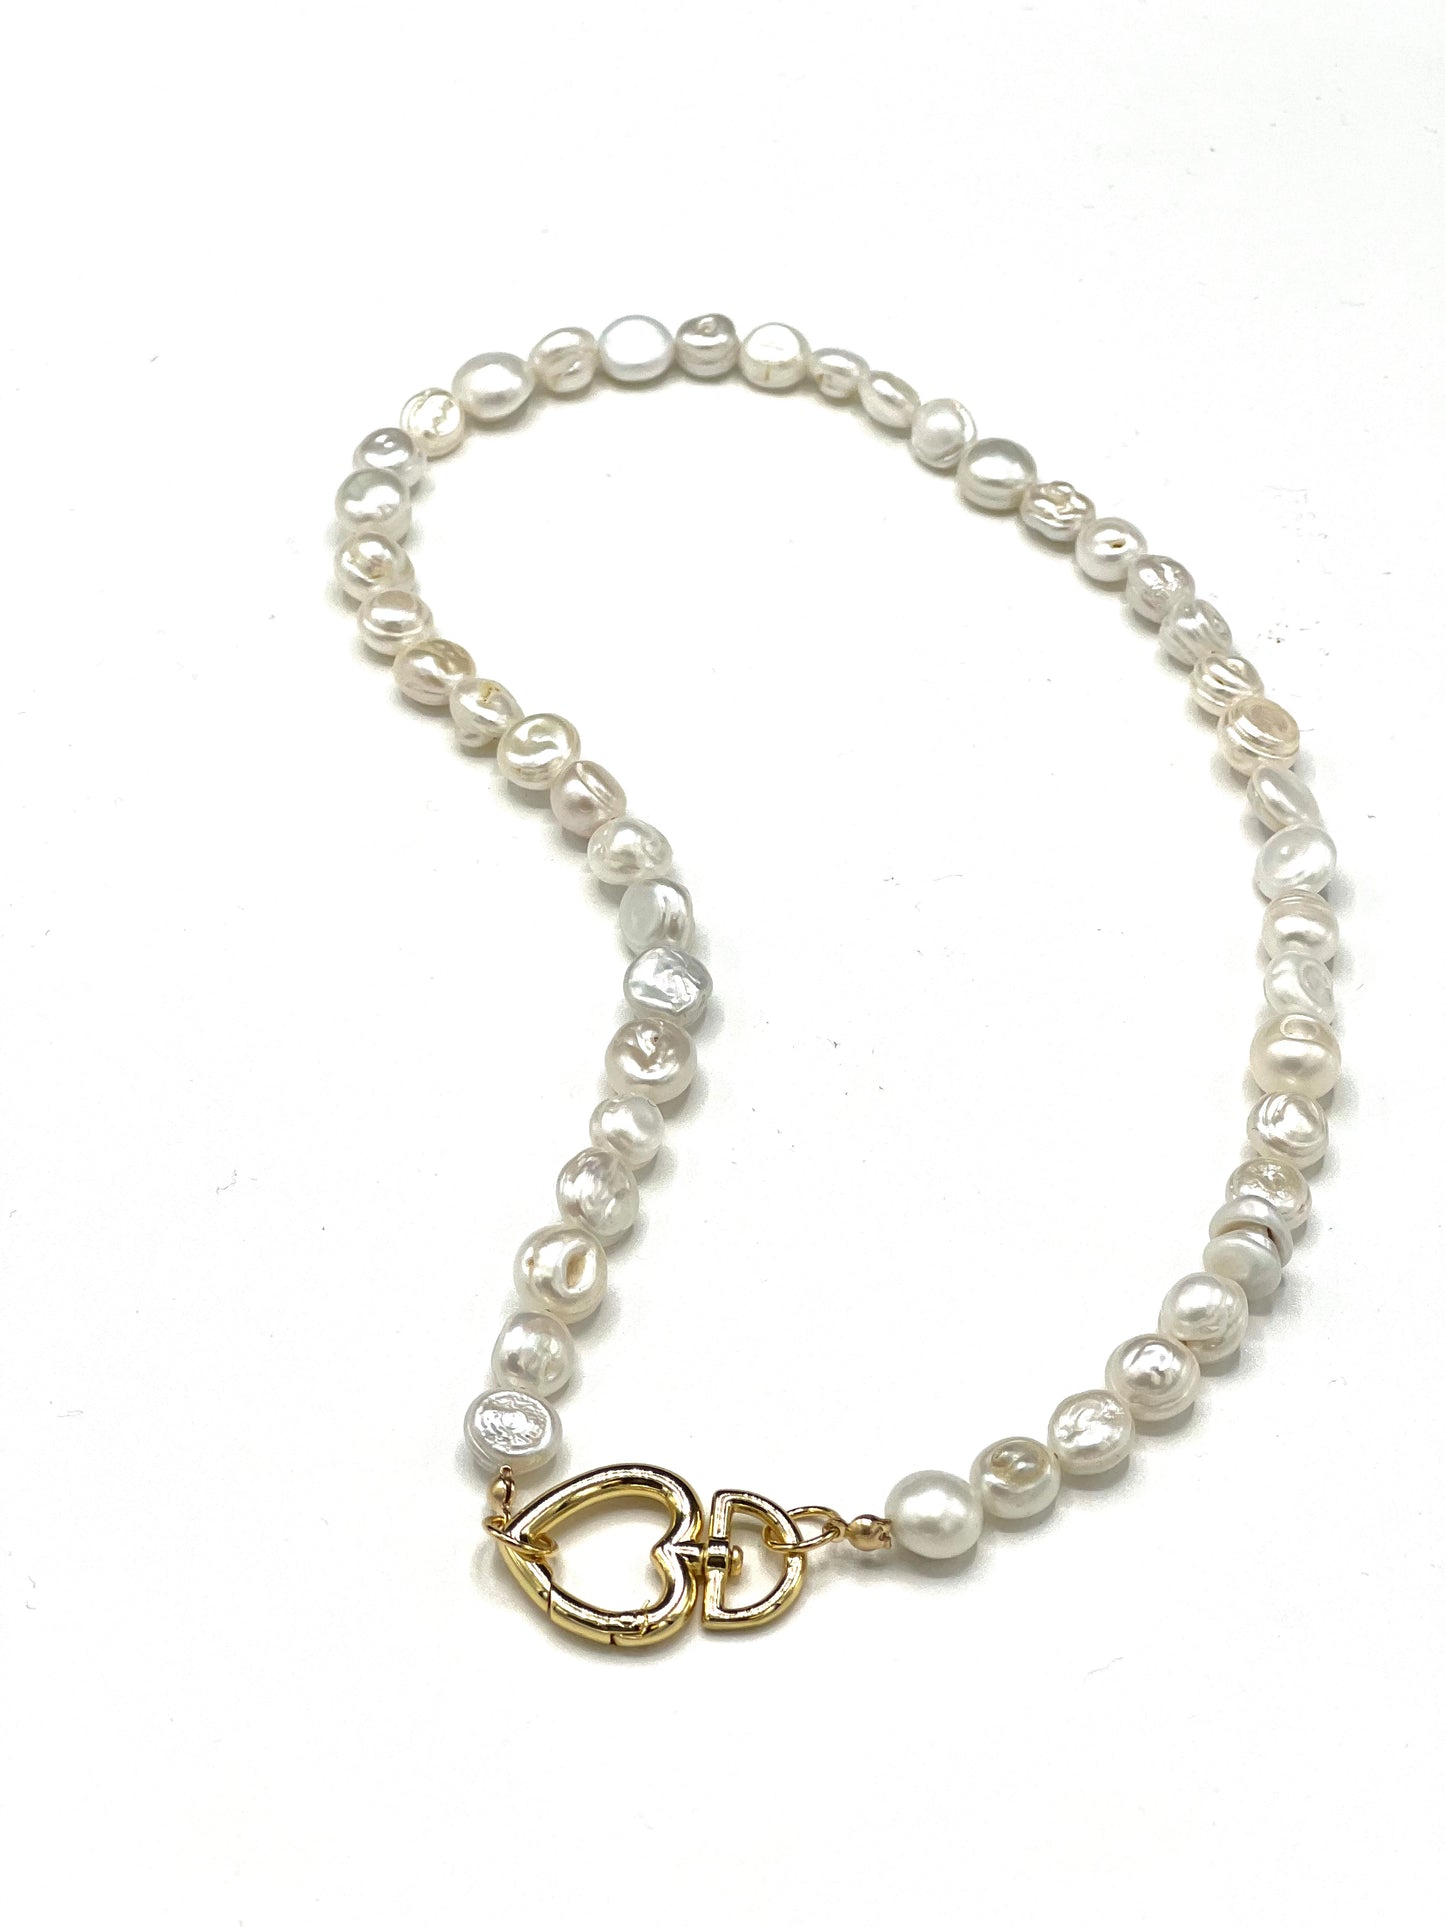 PEARL NECKLACE WITH HEART CLASP